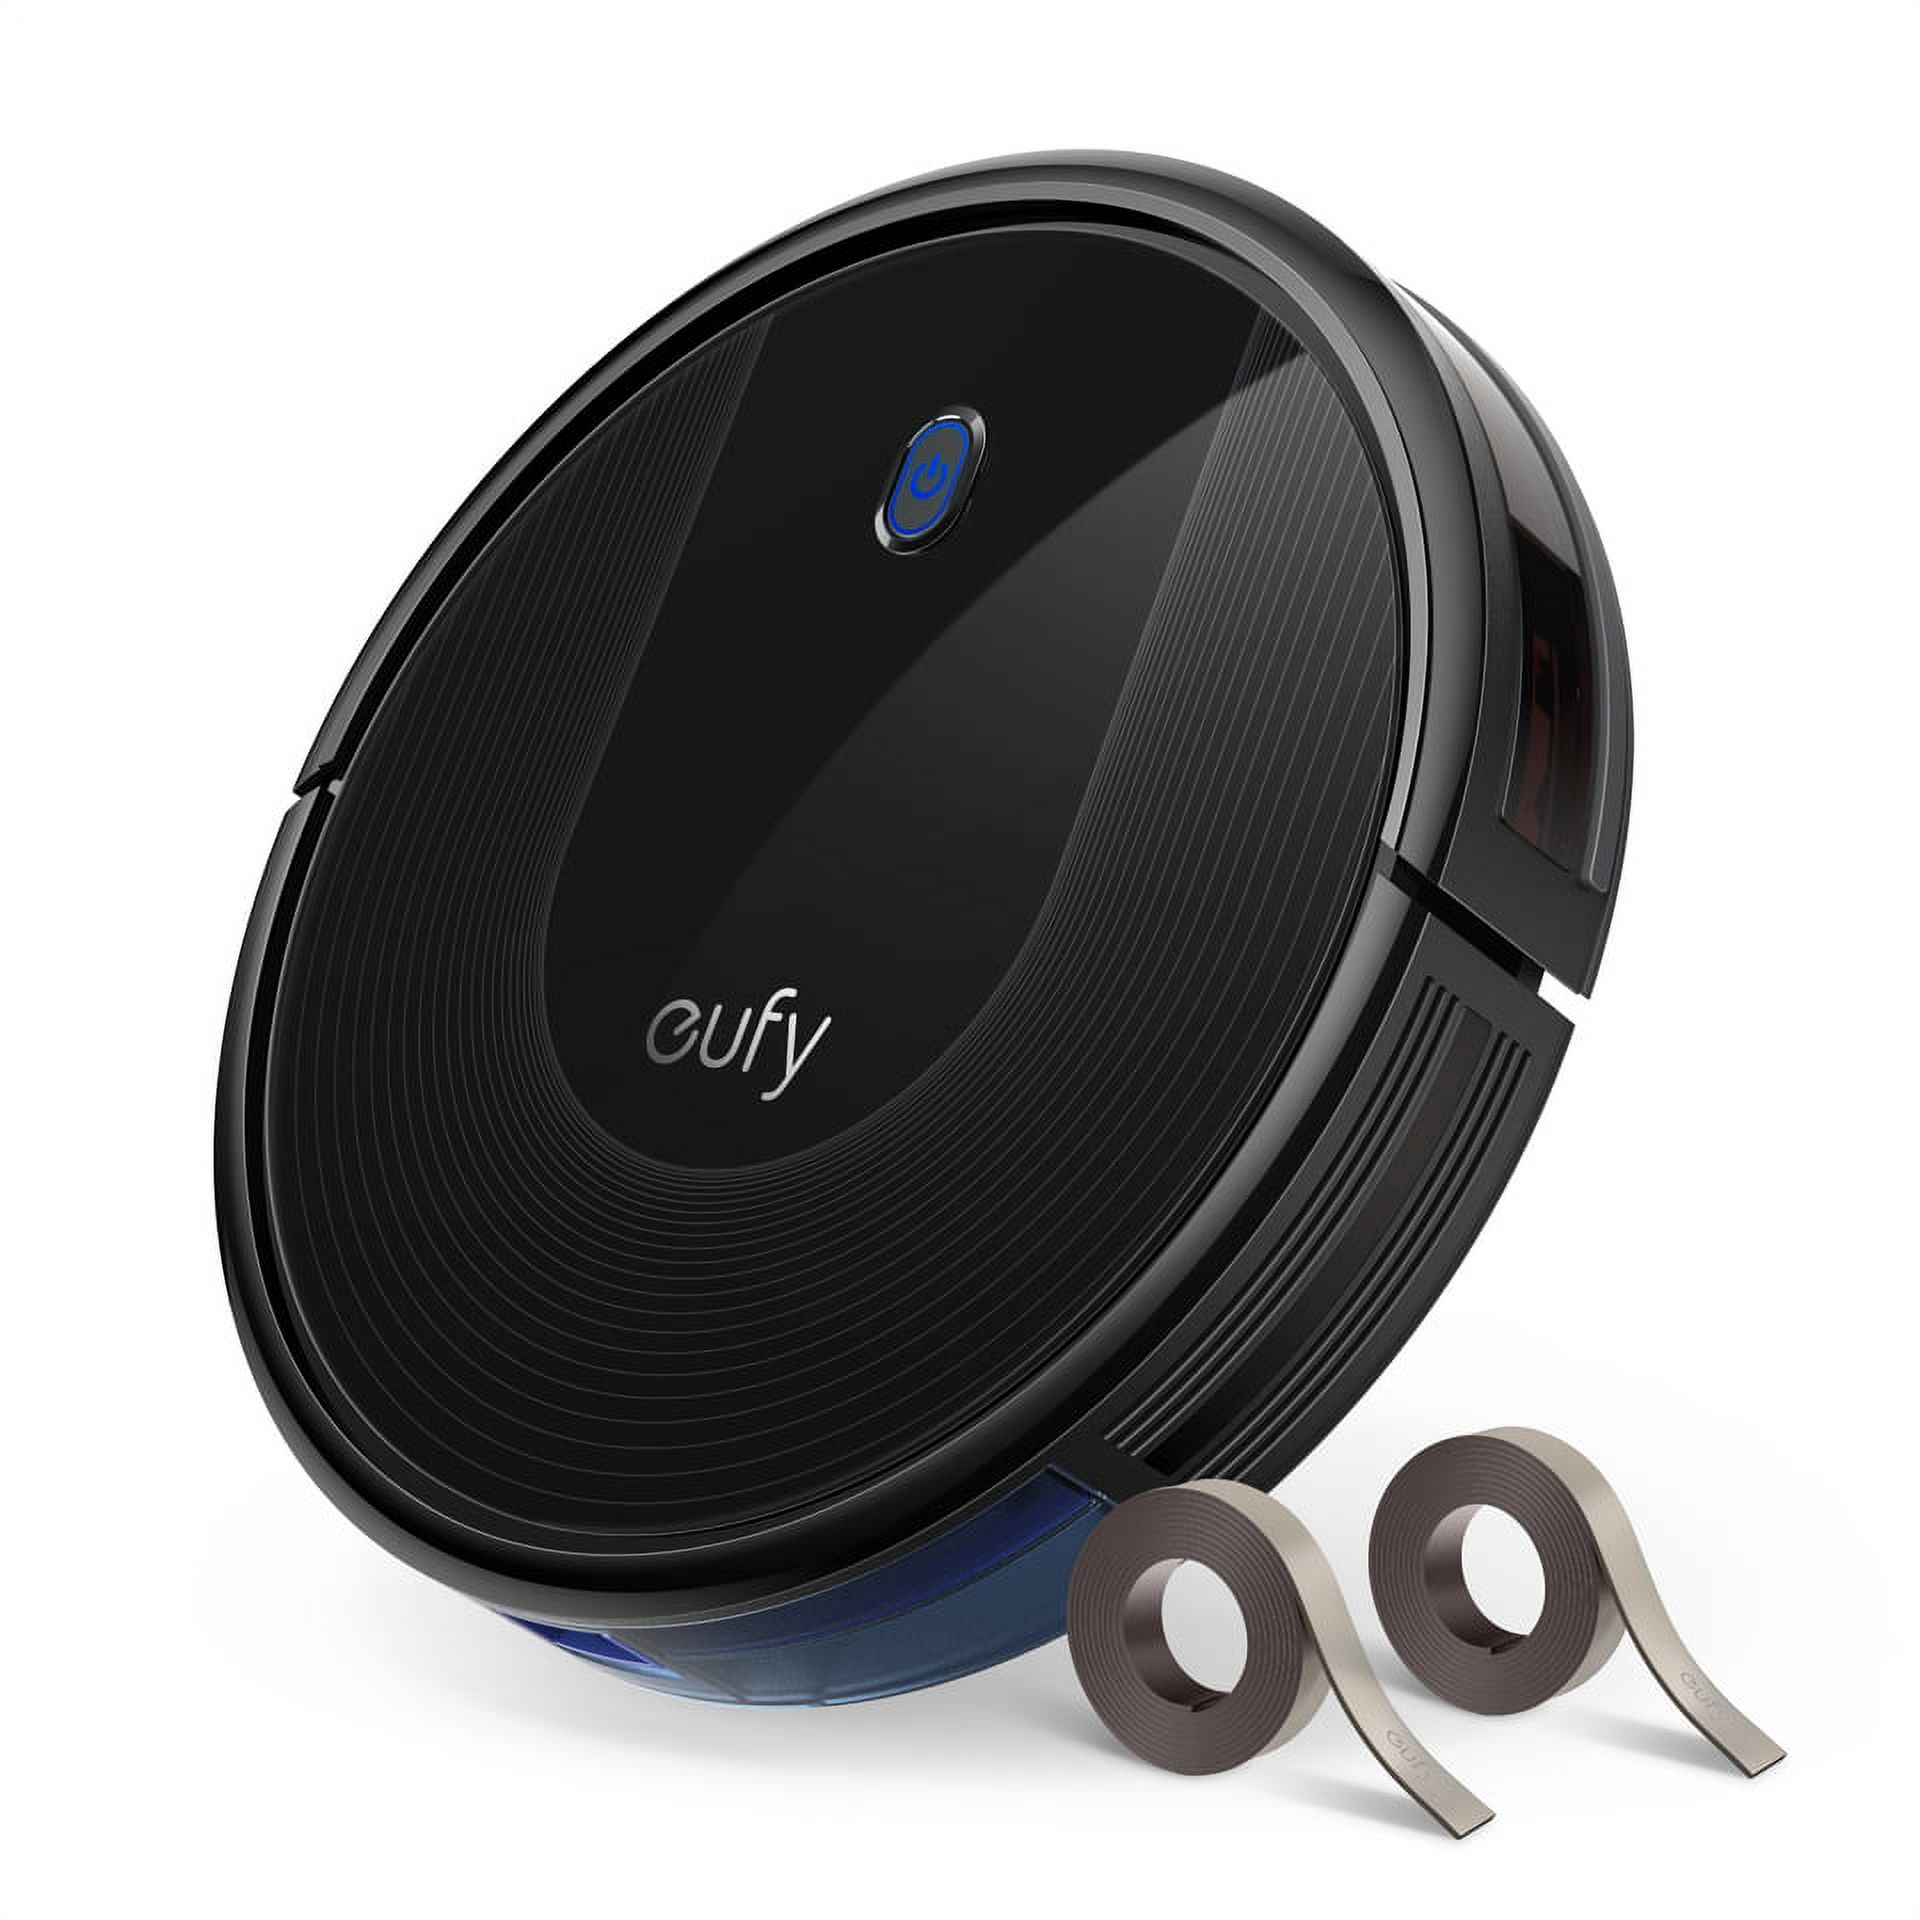 eufy BoostIQ RoboVac 30, Robot Vacuum Cleaner, Upgraded, Super-Thin, 1500Pa Strong Suction, 13ft Boundary Strips Included, Quiet, Self-Charging, Cleans Hard Floors to Medium-Pile Carpets - image 1 of 7